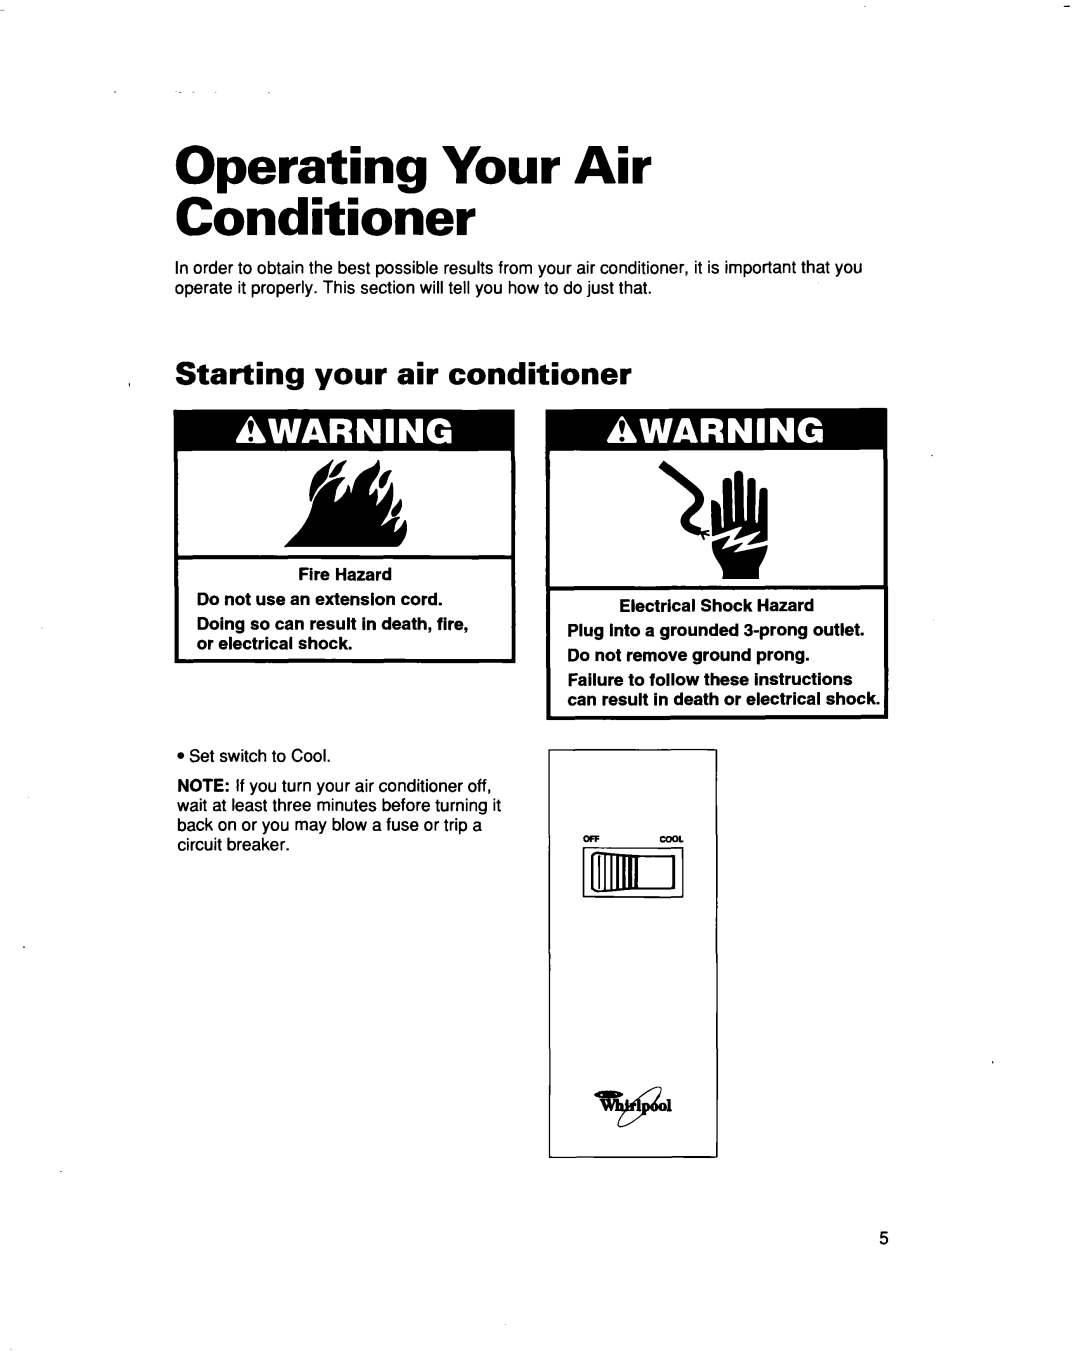 Whirlpool ACM492 warranty Operating Your Air Conditioner, Starting your air conditioner, OFF cool Lllllml 